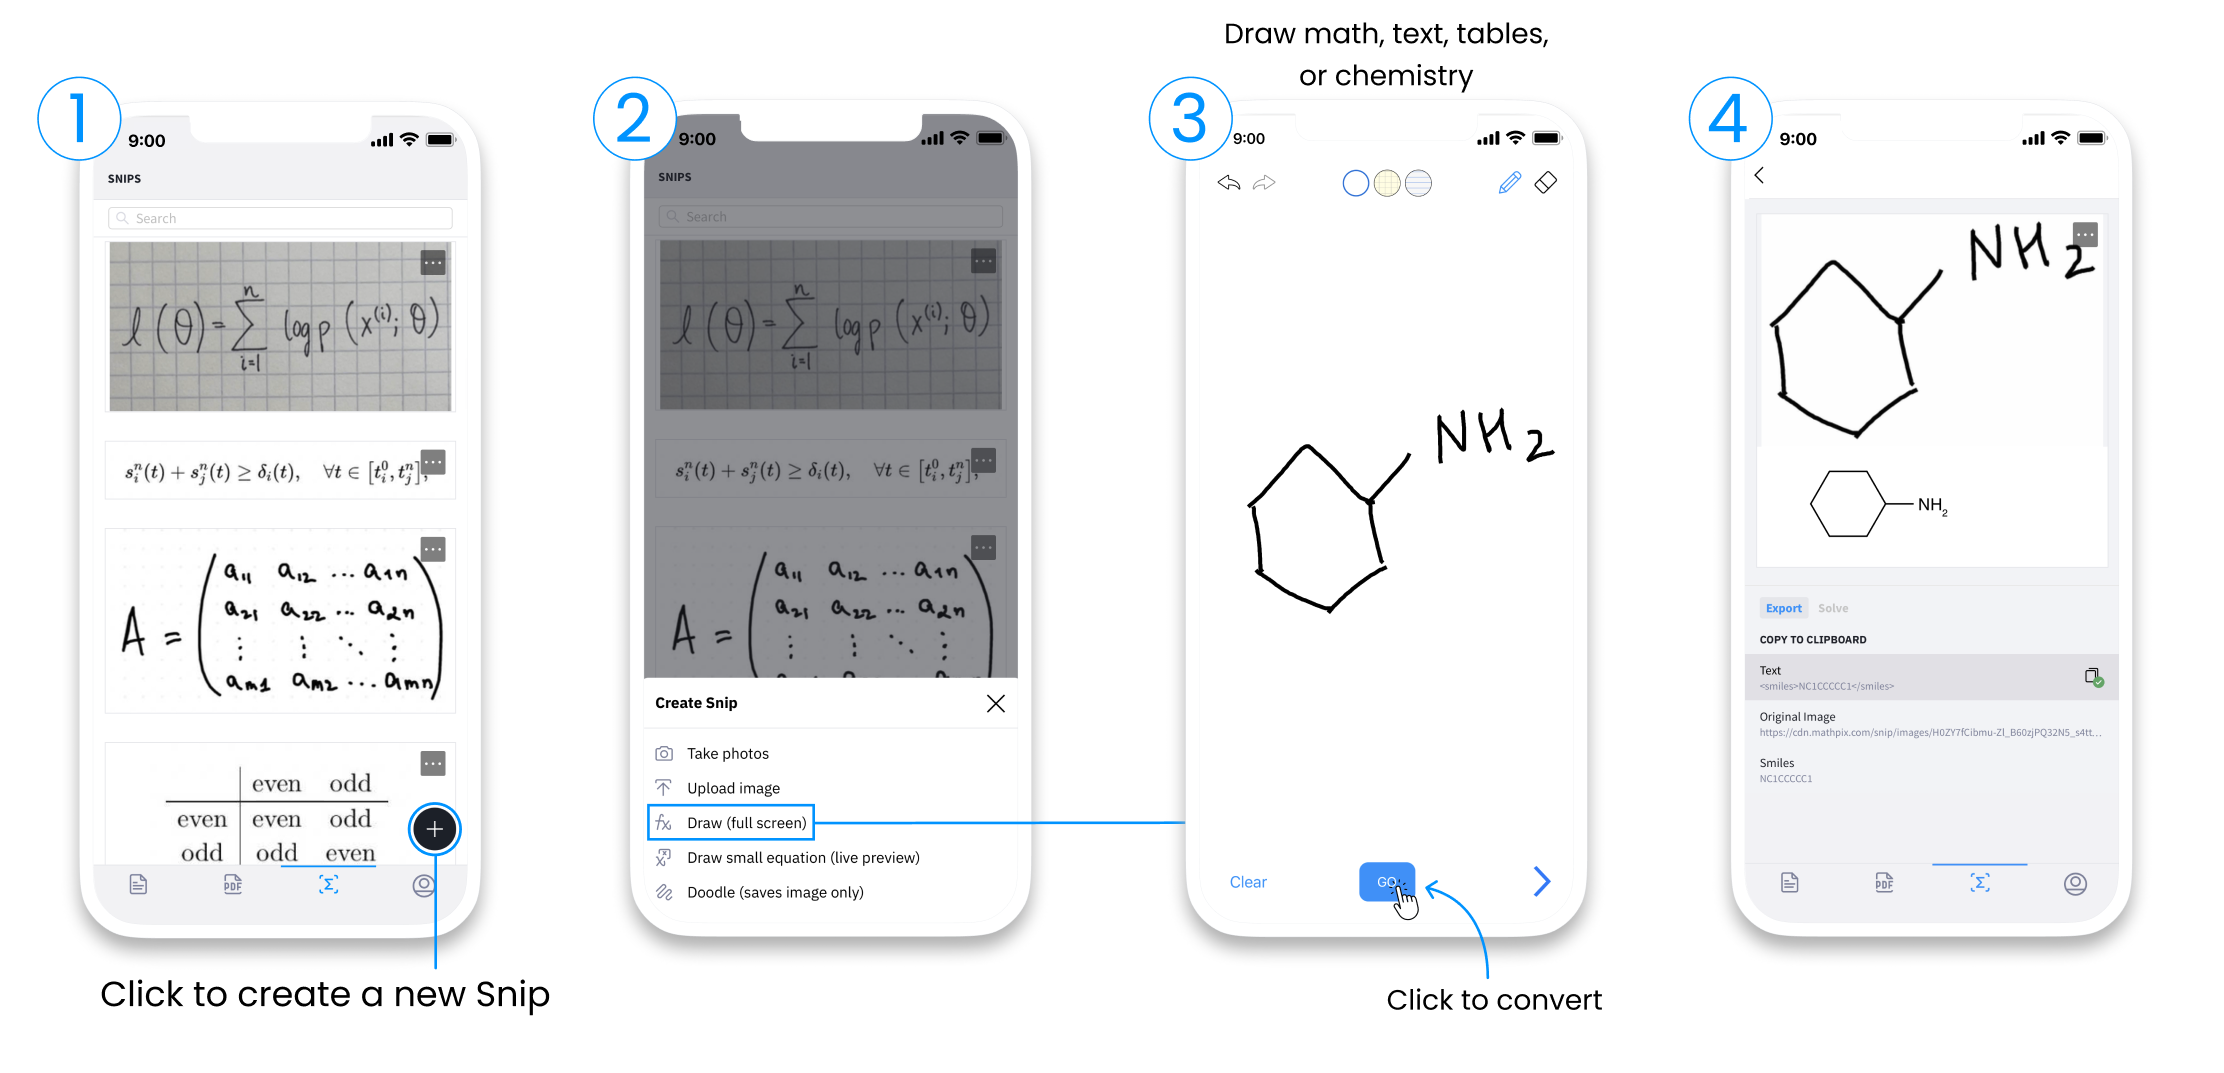 Steps for drawing a Snip of a chemical diagram on iOS